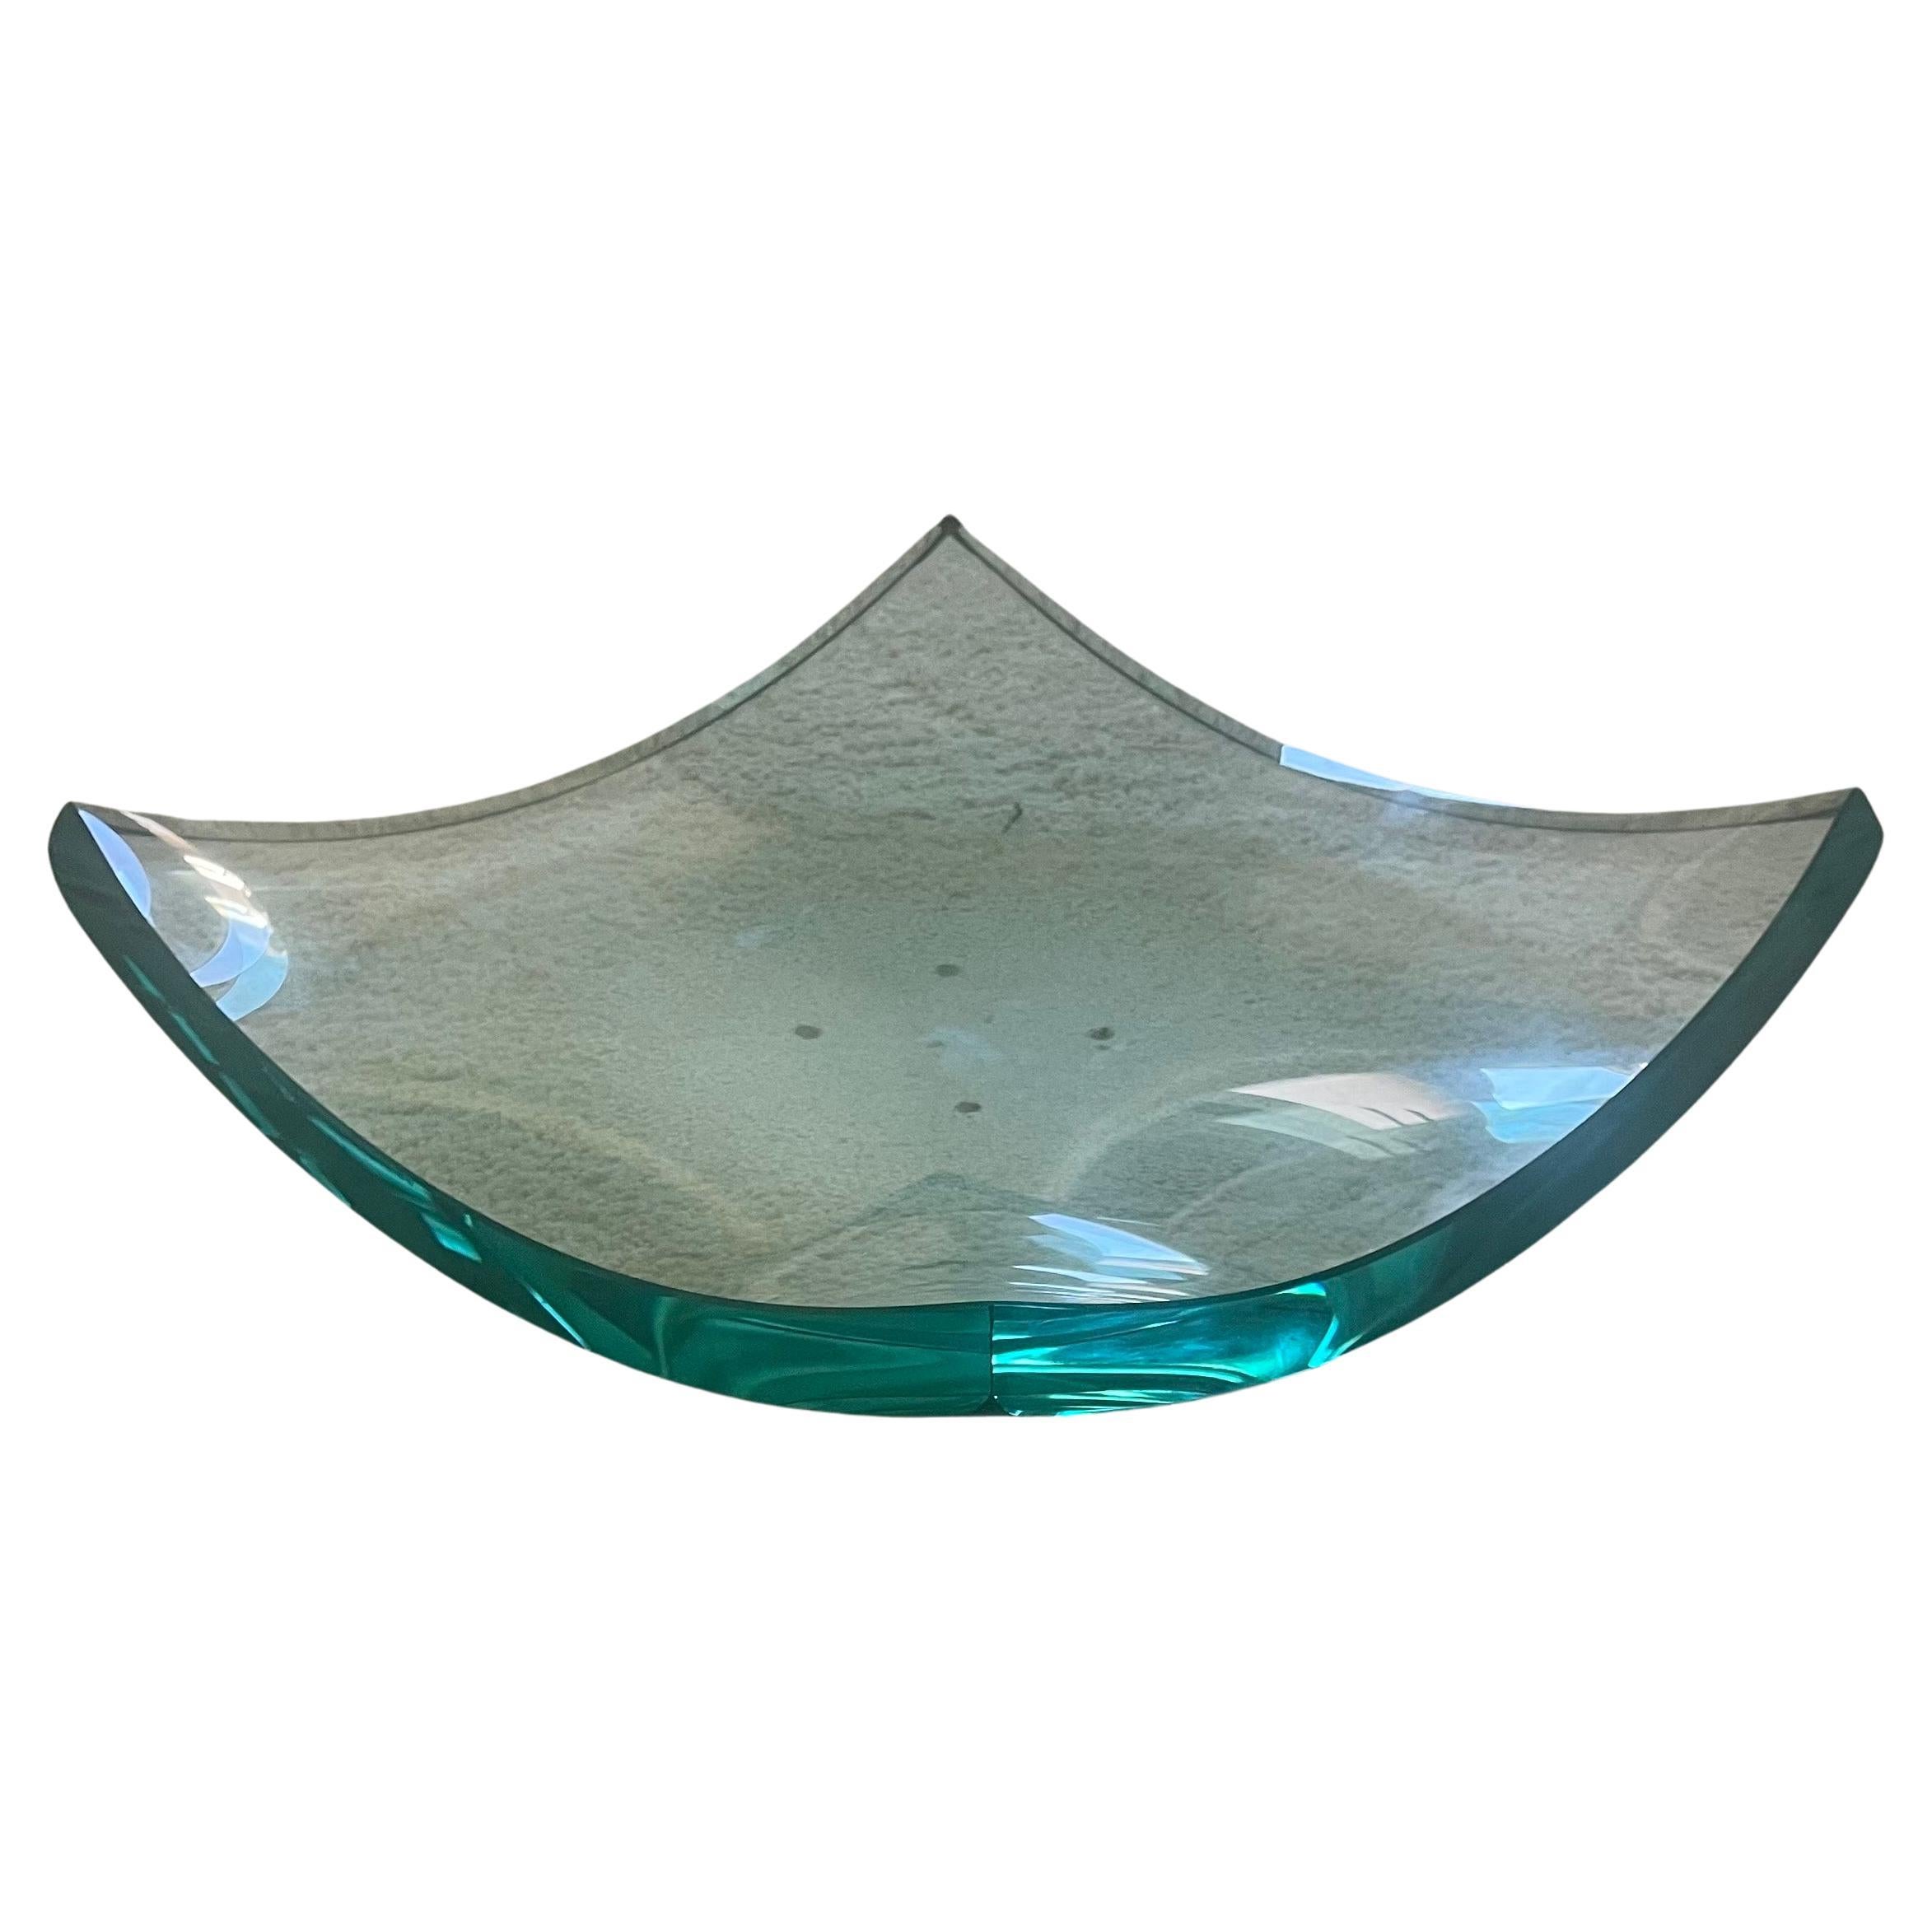 Minimalist modern Italian polished glass bowl / centerpiece by Salvatore Polizzi, circa 1980s. The bowl is in very good vintage condition with no chips or cracks and measures 14